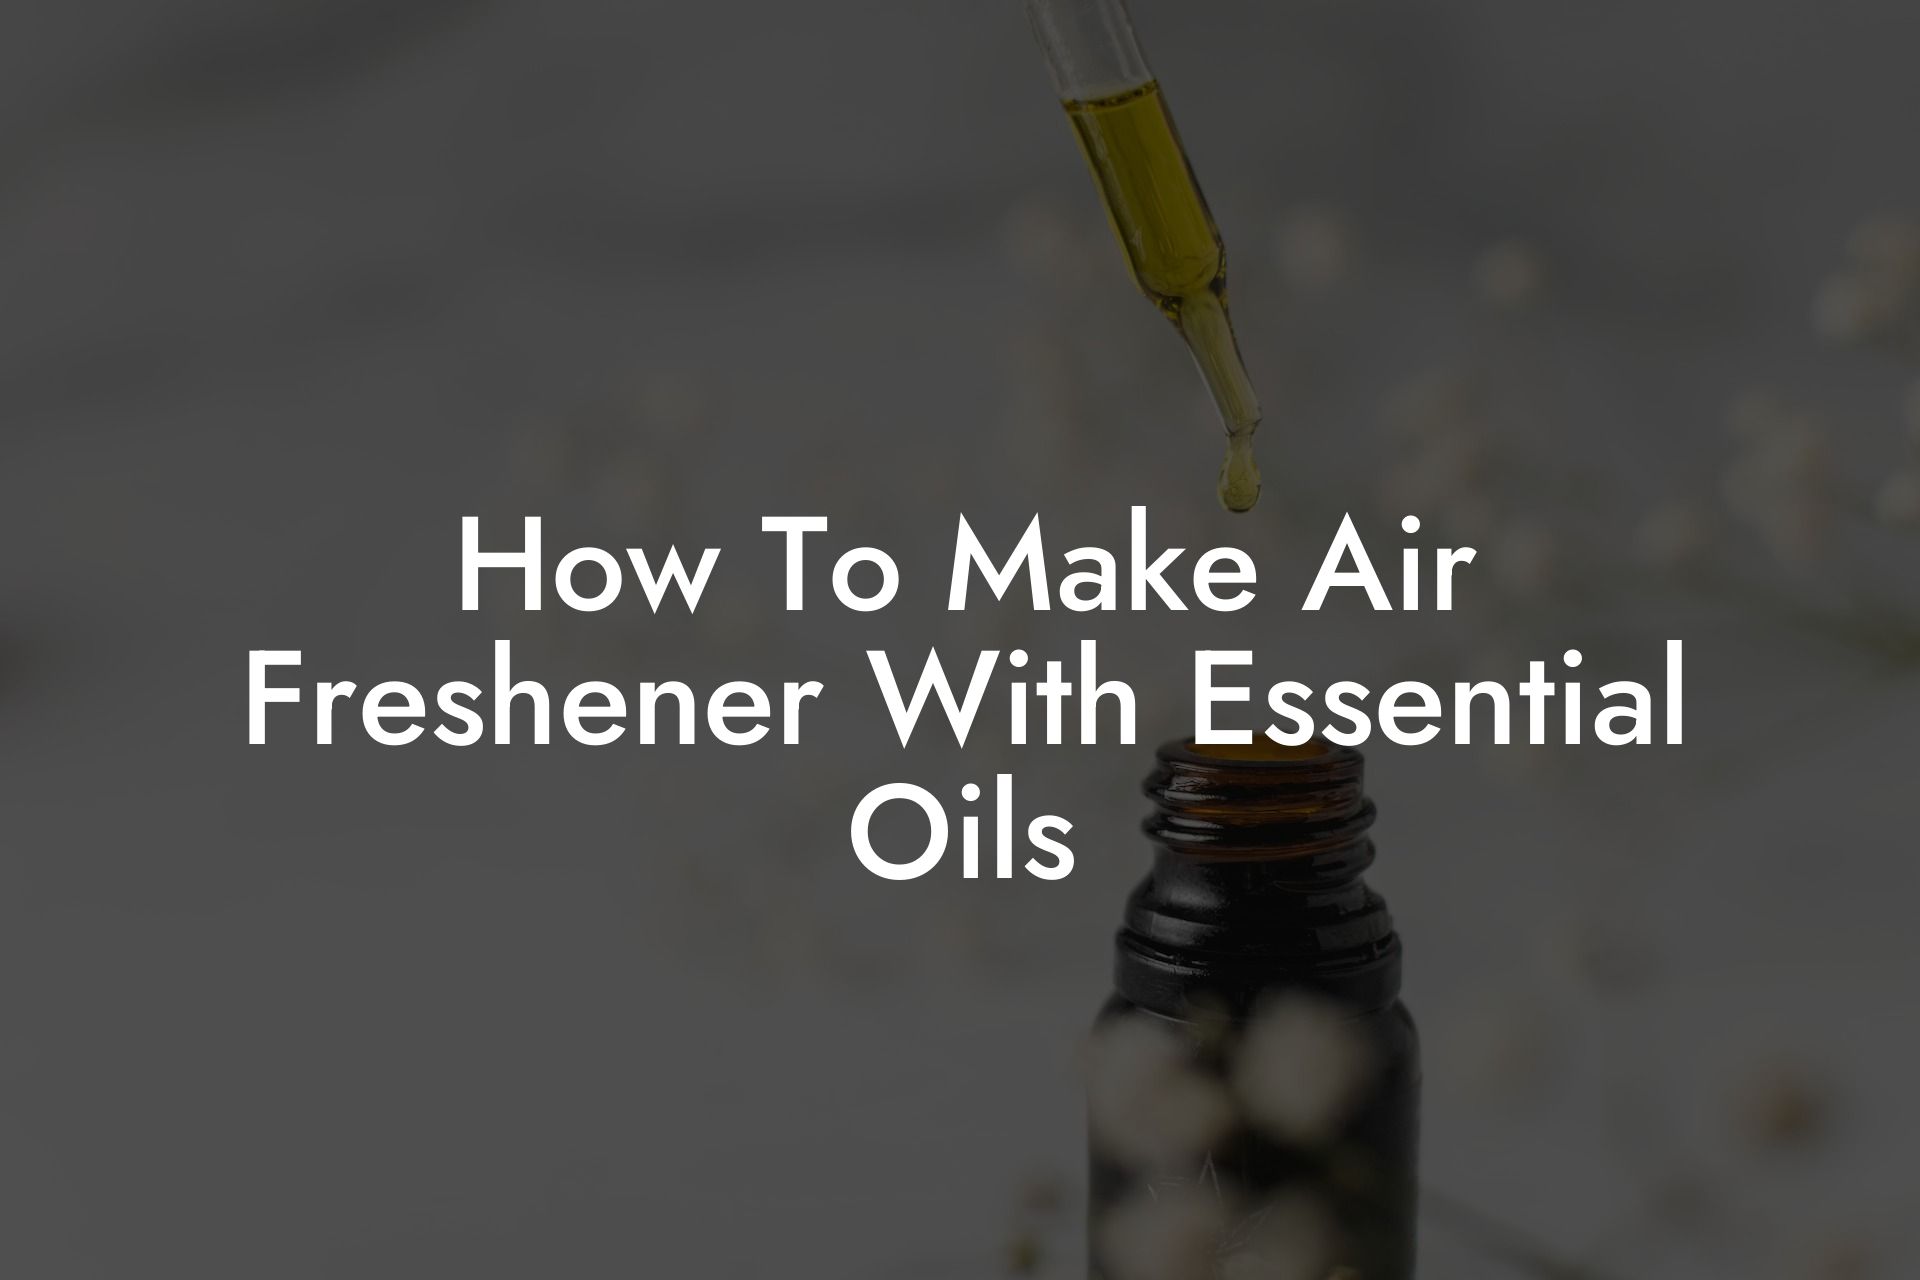 How To Make Air Freshener With Essential Oils